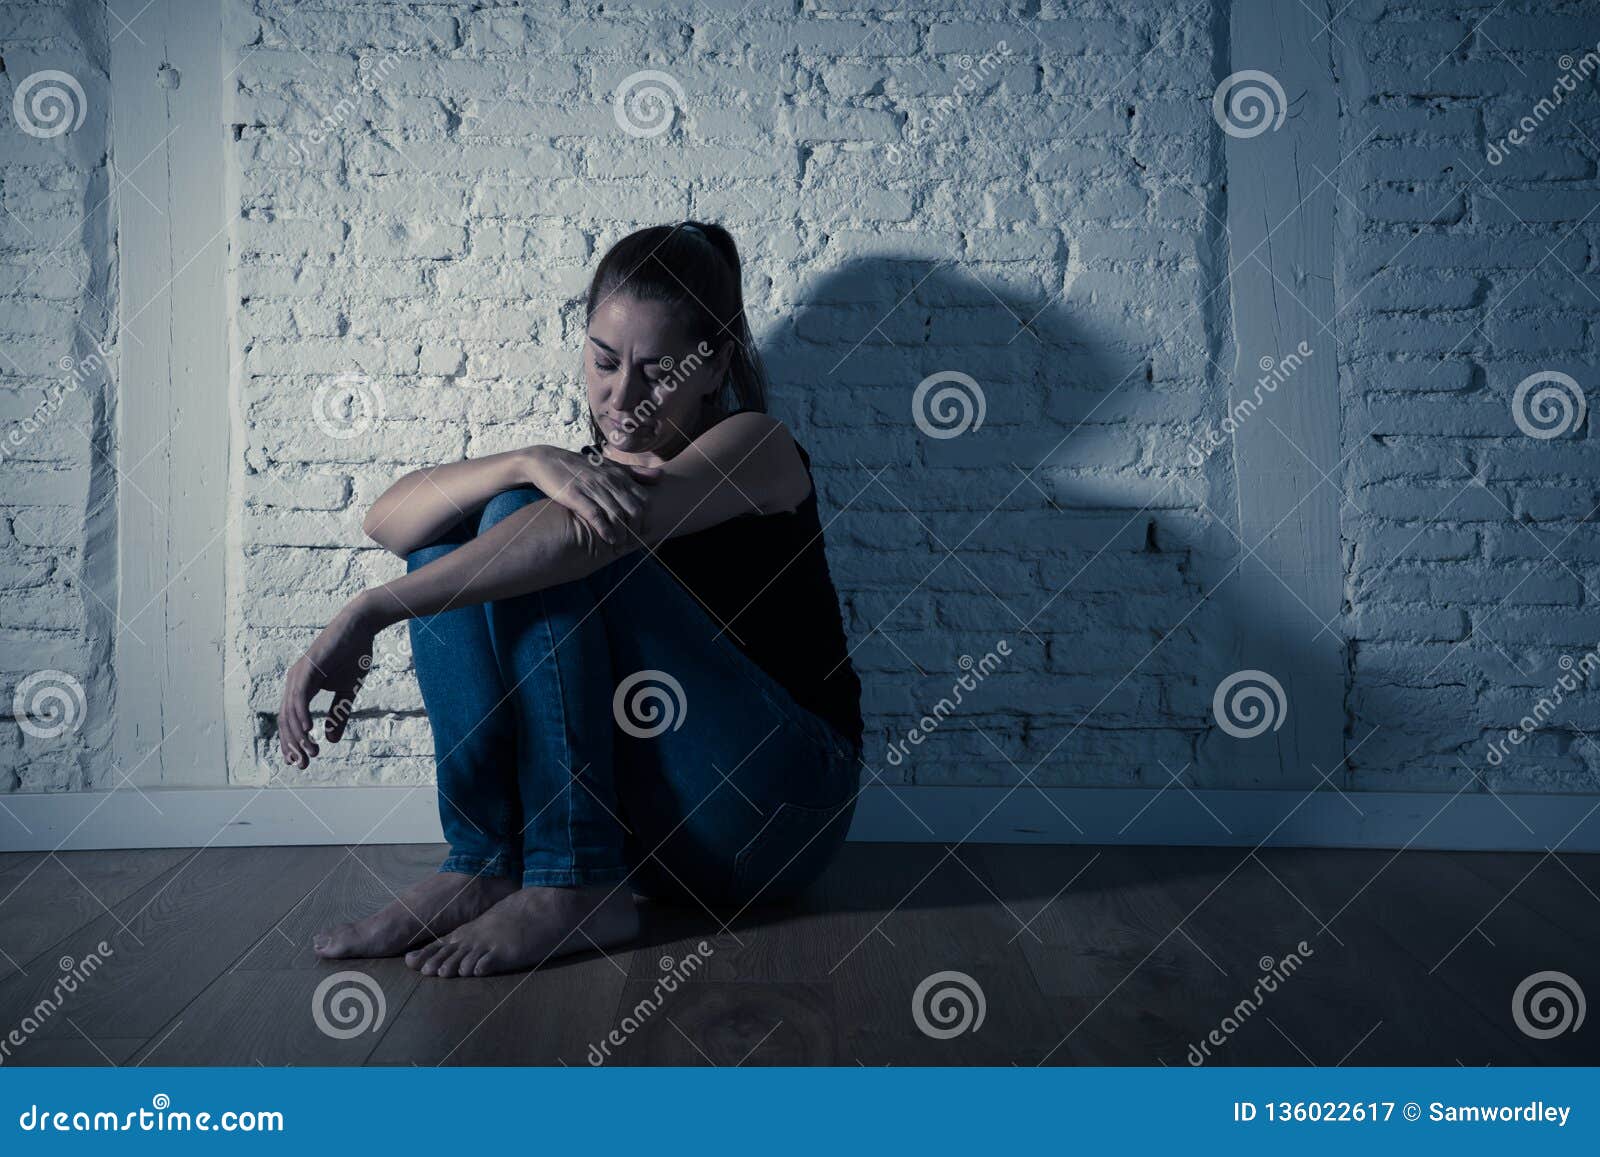 Sad Lonely Woman Suffering from Depression Sitting Alone and ...